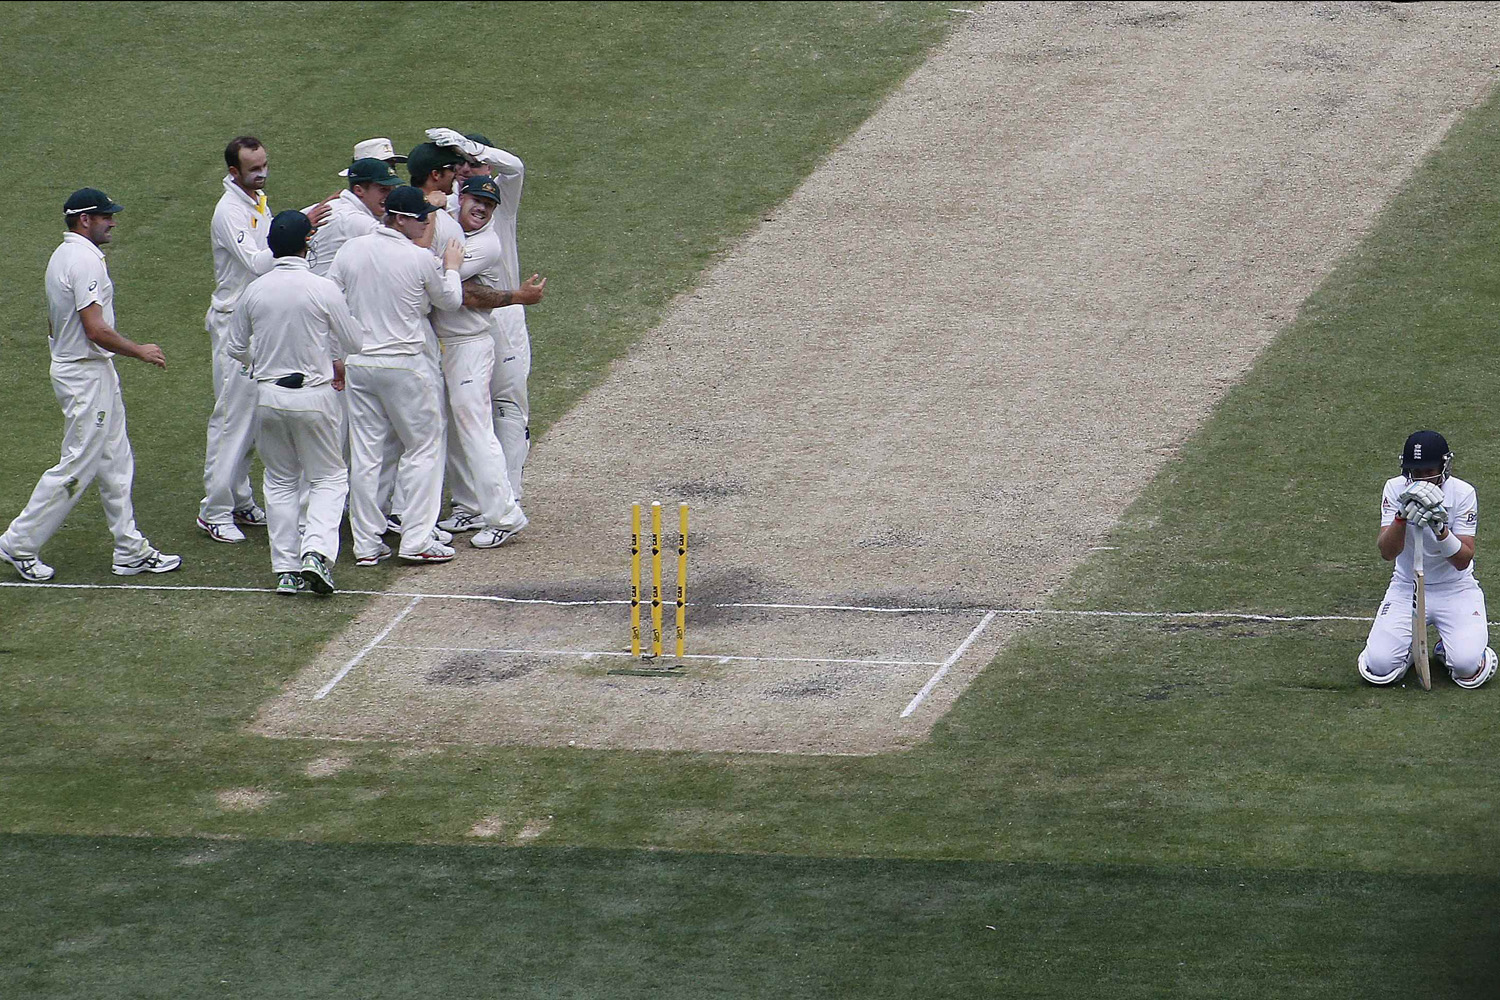 Australia's team celebrates after the dismissal of England's Root during the third day of the fourth Ashes cricket test at the Melbourne cricket ground